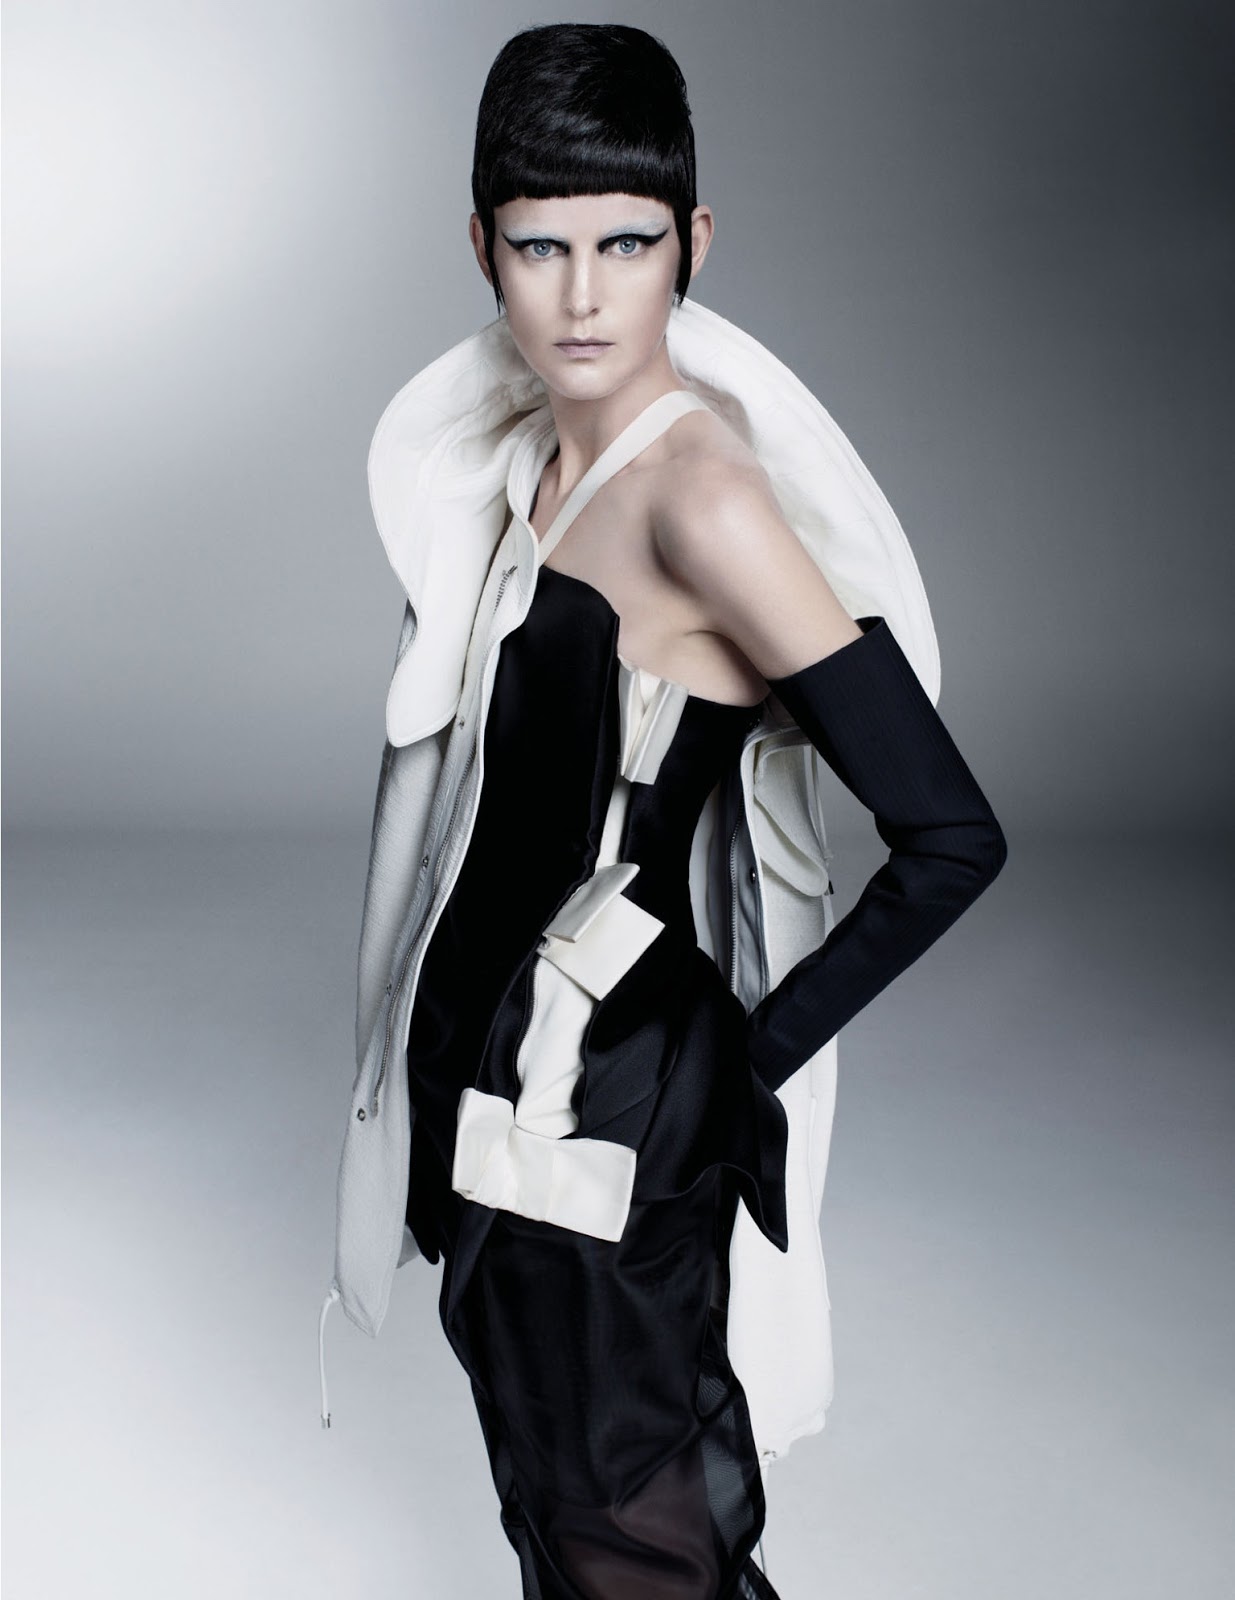 Starchitecture Stella Tennant By Steven Meisel For W March 2013